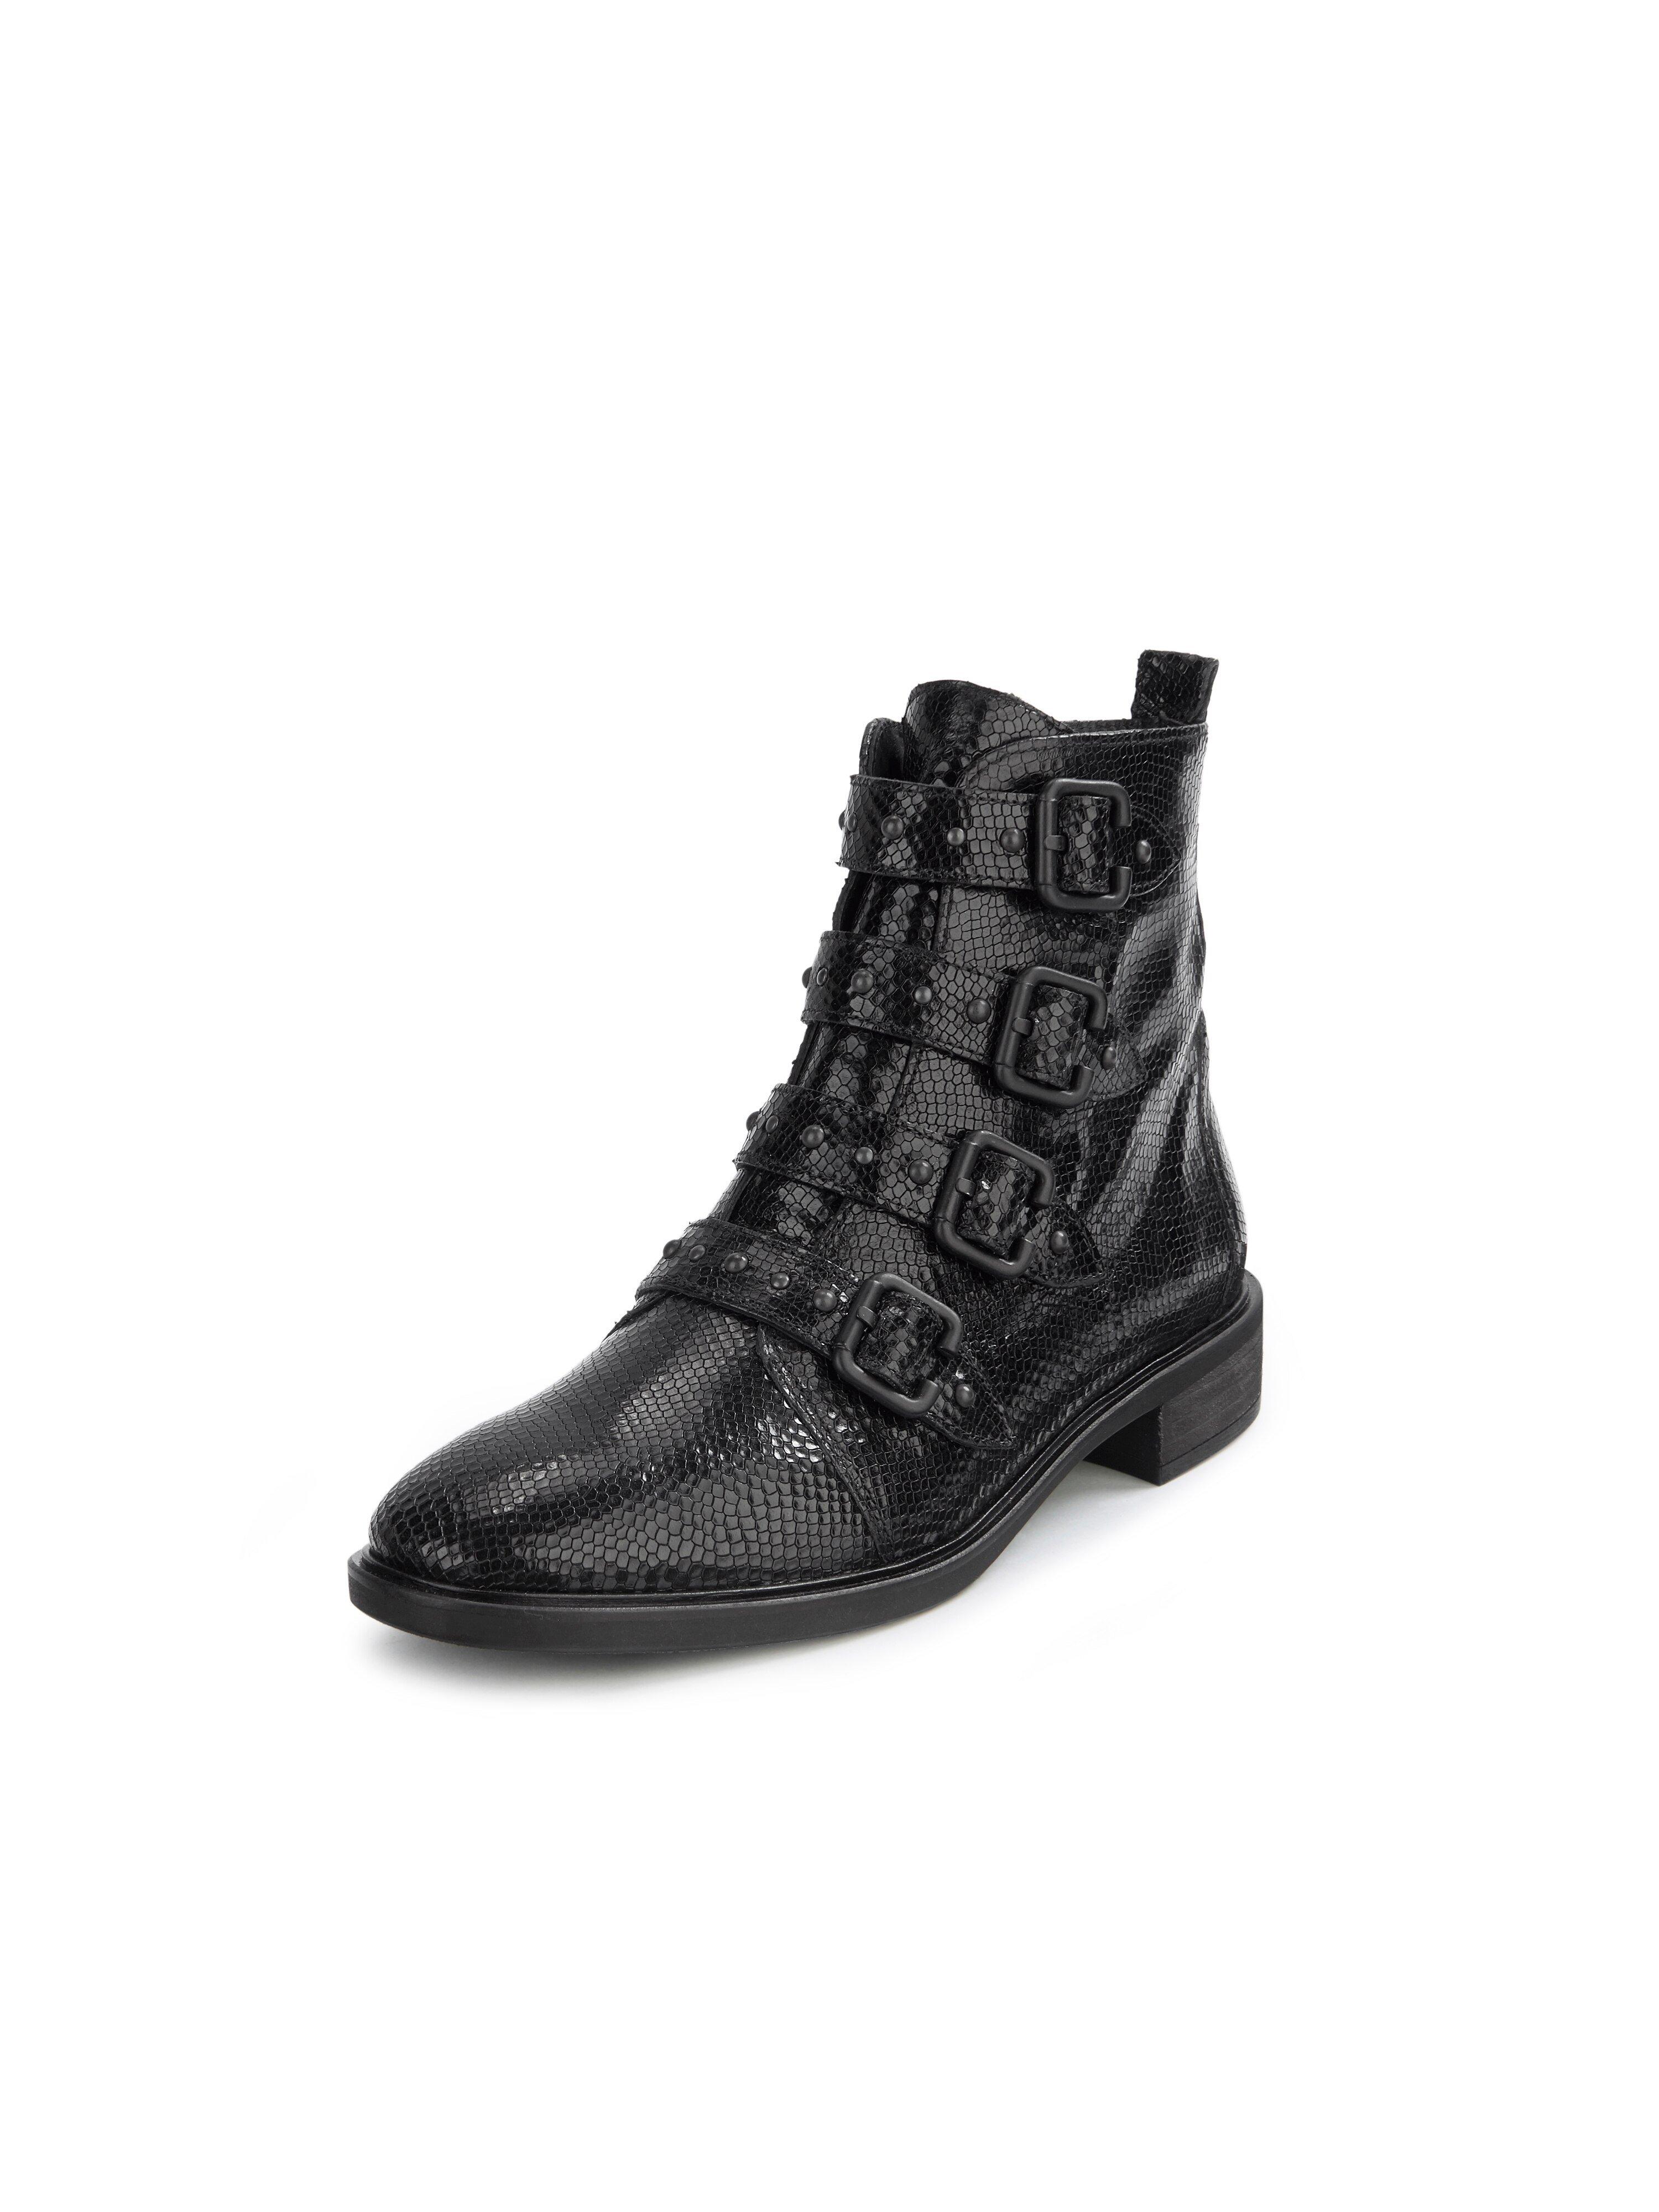 paul green ankle boots sale